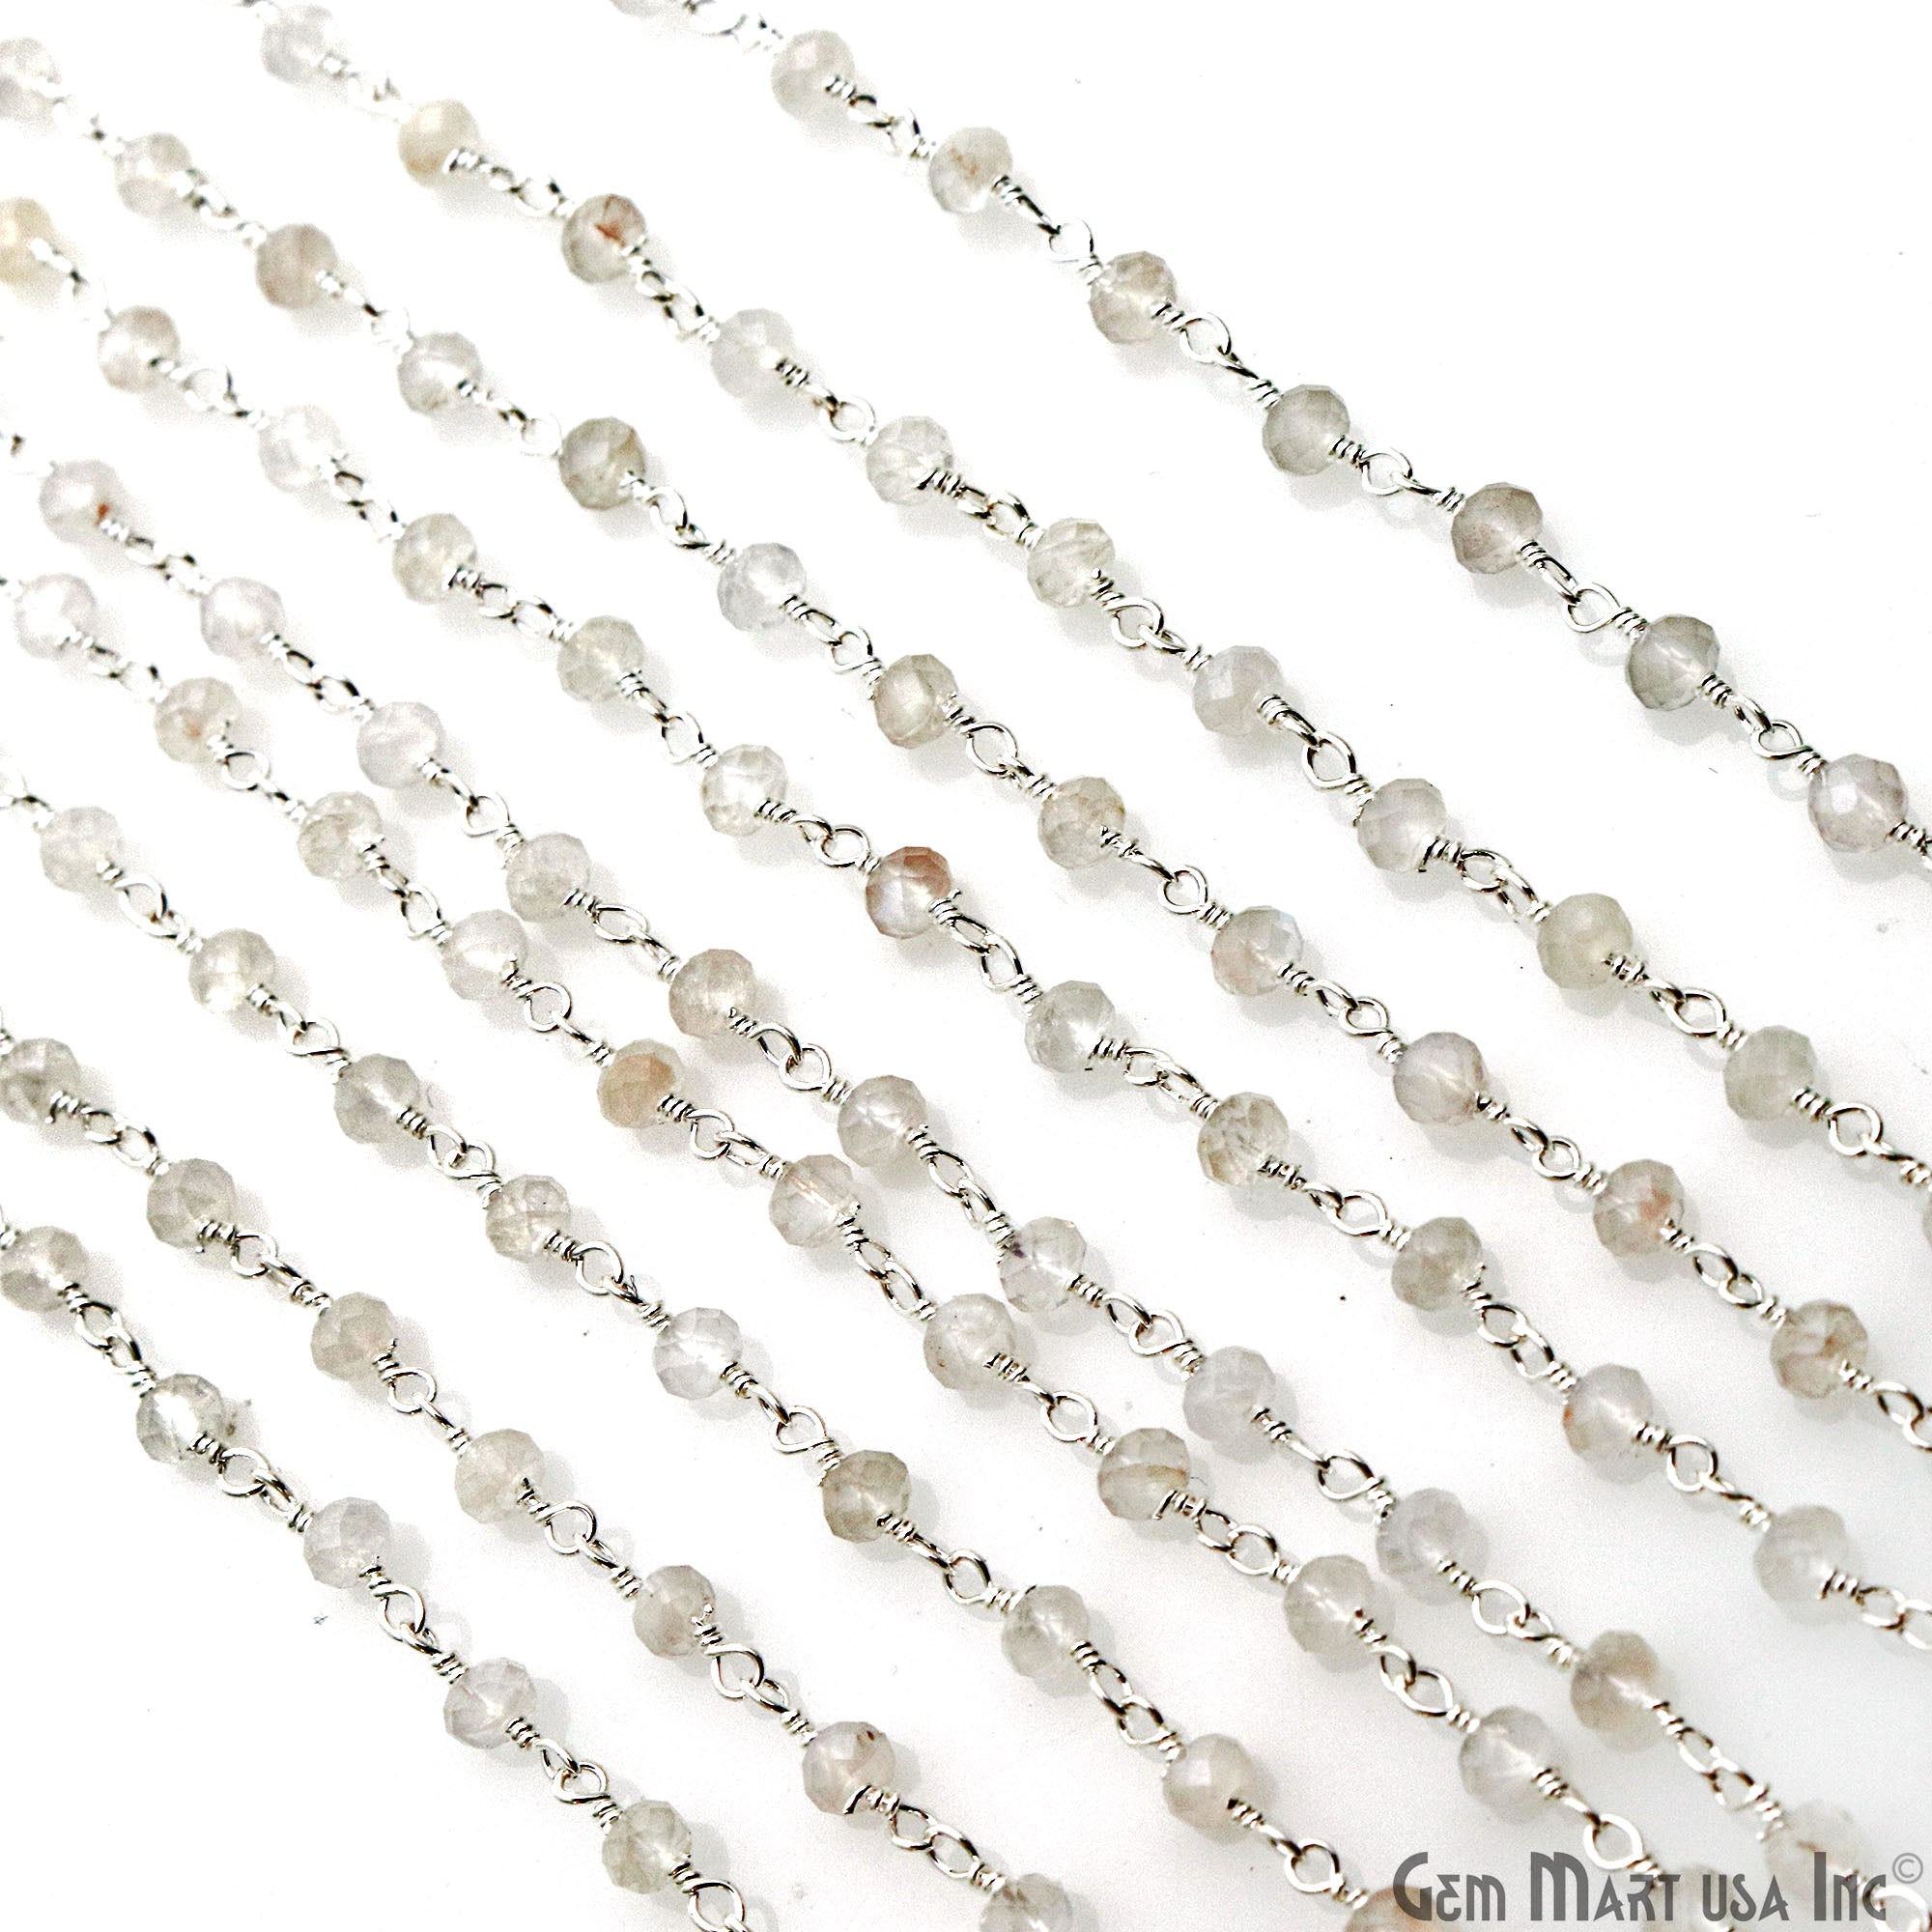 White Chalcedony 2.5-3mm Tiny Beads Silver Plated Wire Wrapped Rosary Chain